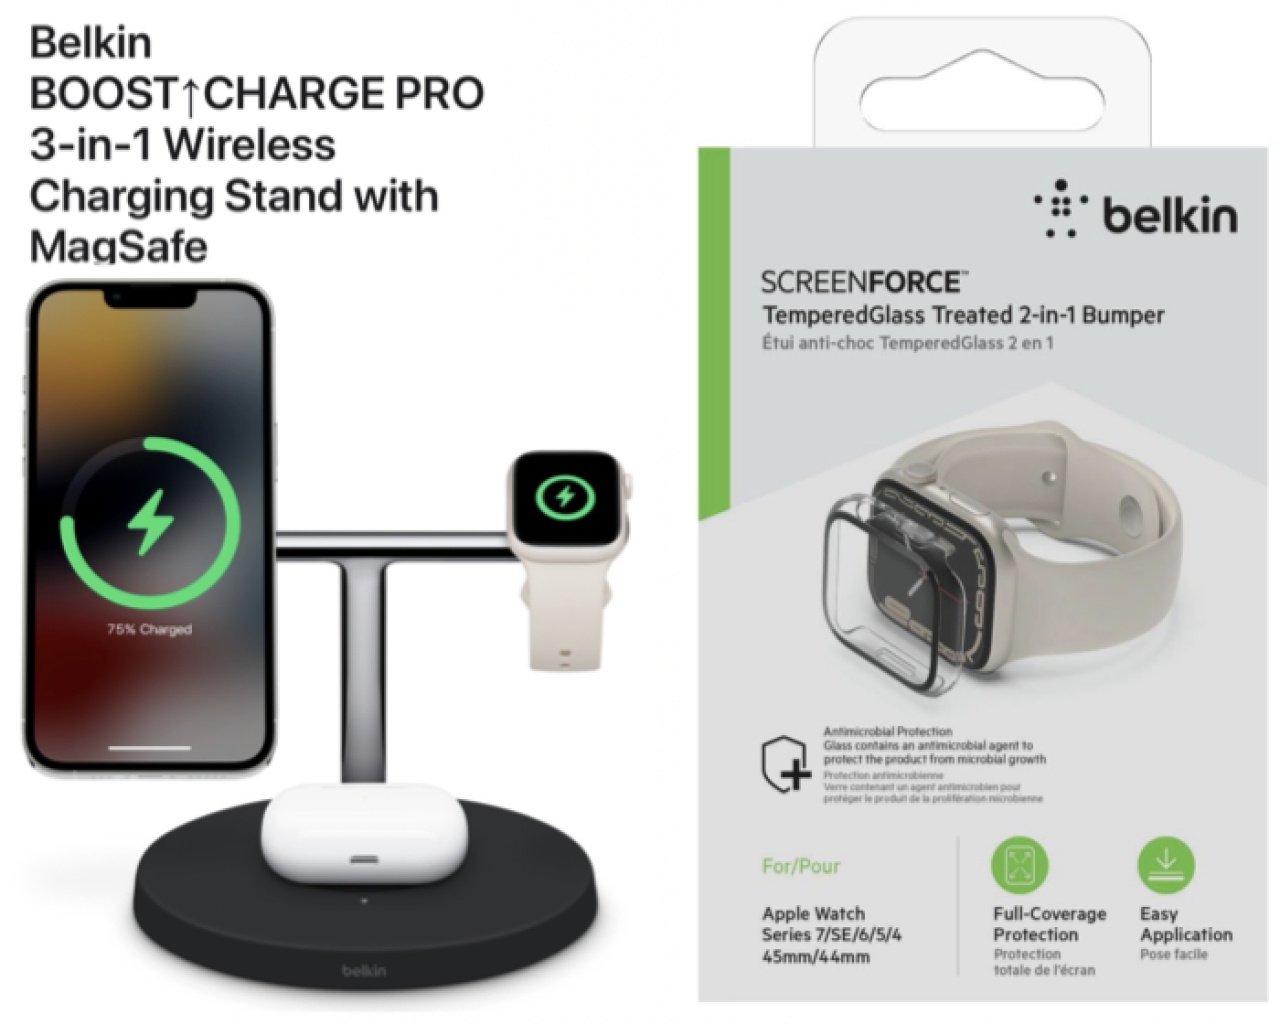 Belkin launches new 2-in-1 MagSafe & Apple Watch charger